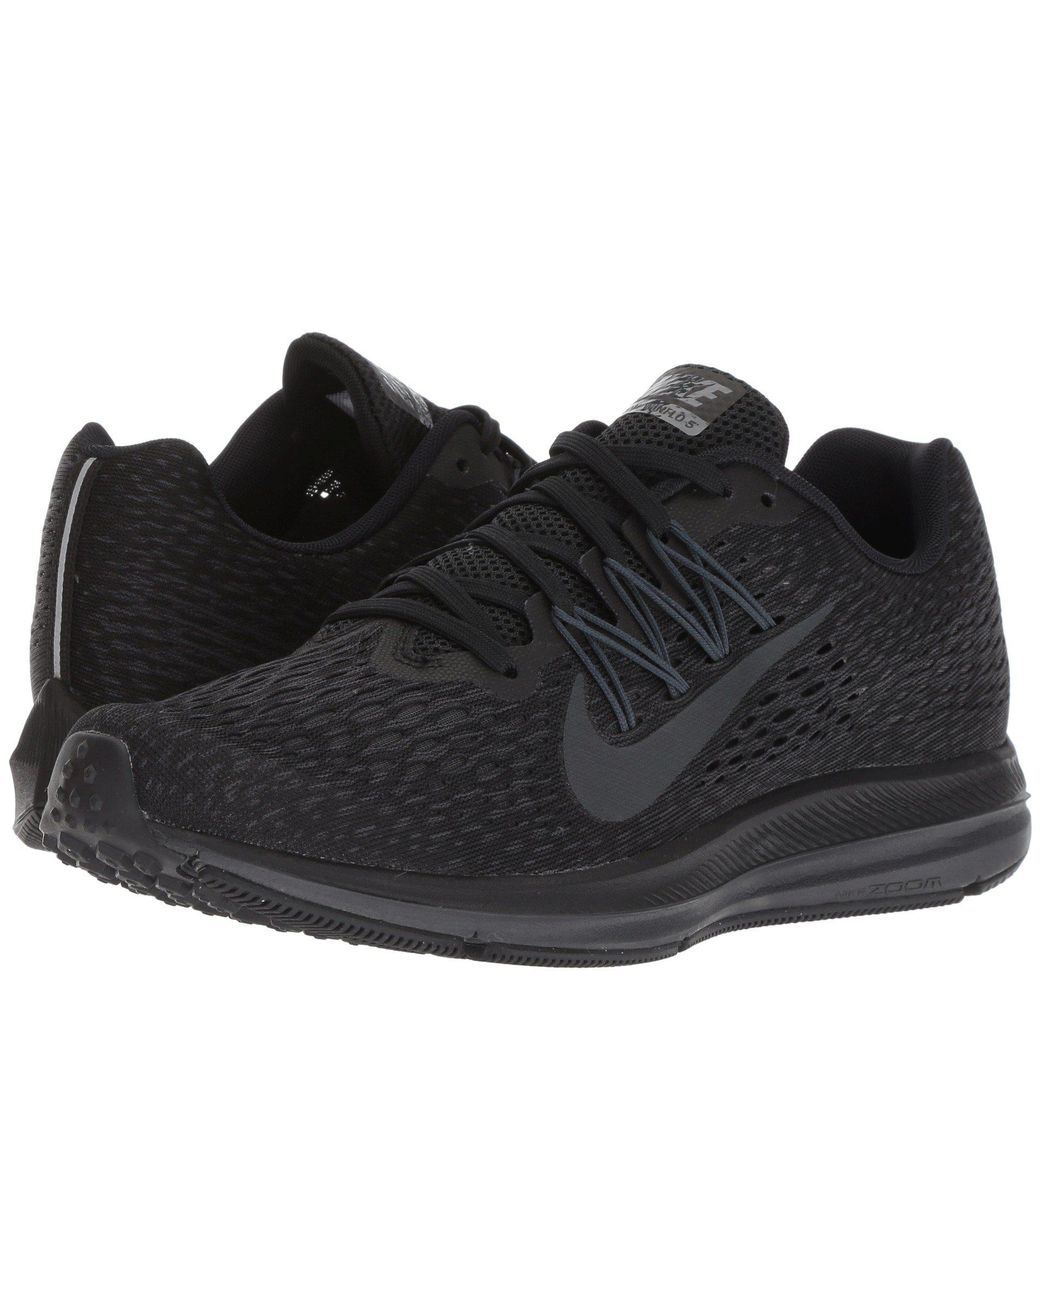 Nike Rubber Air Zoom Winflo 5 (black/anthracite) Running Shoes | Lyst